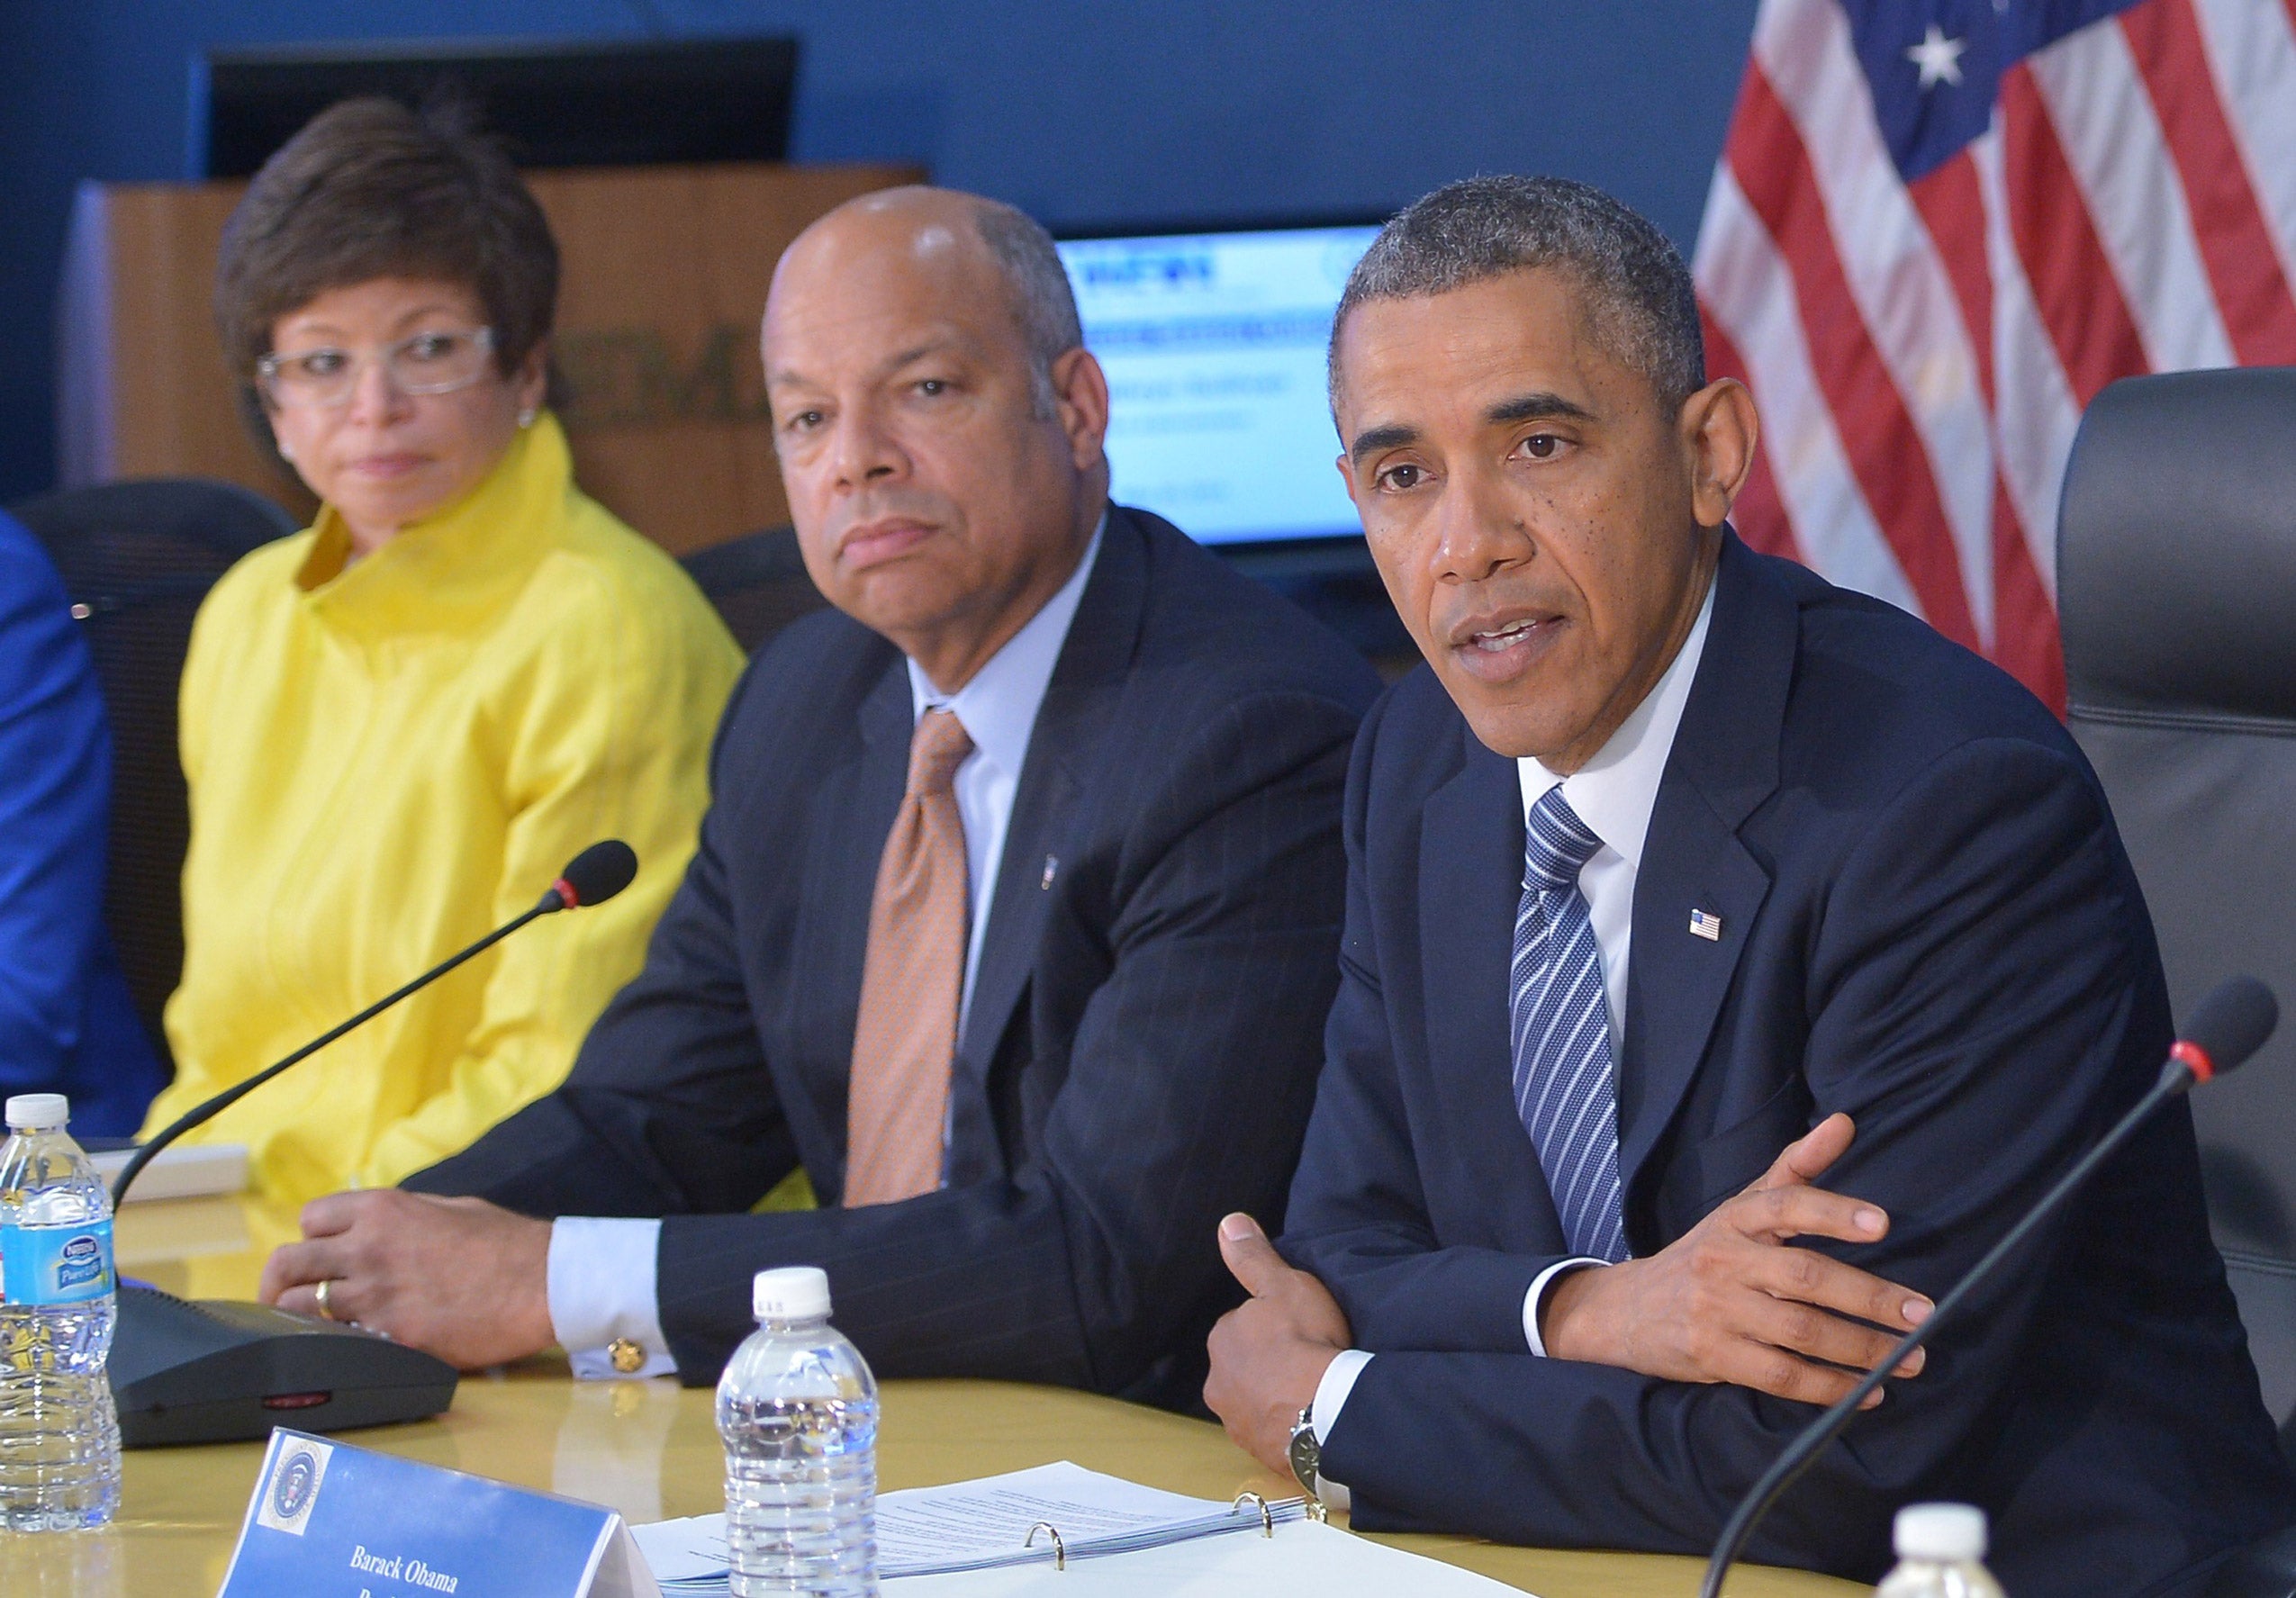 One woman and two men speaking at a meeting (one of the men is President Obama)